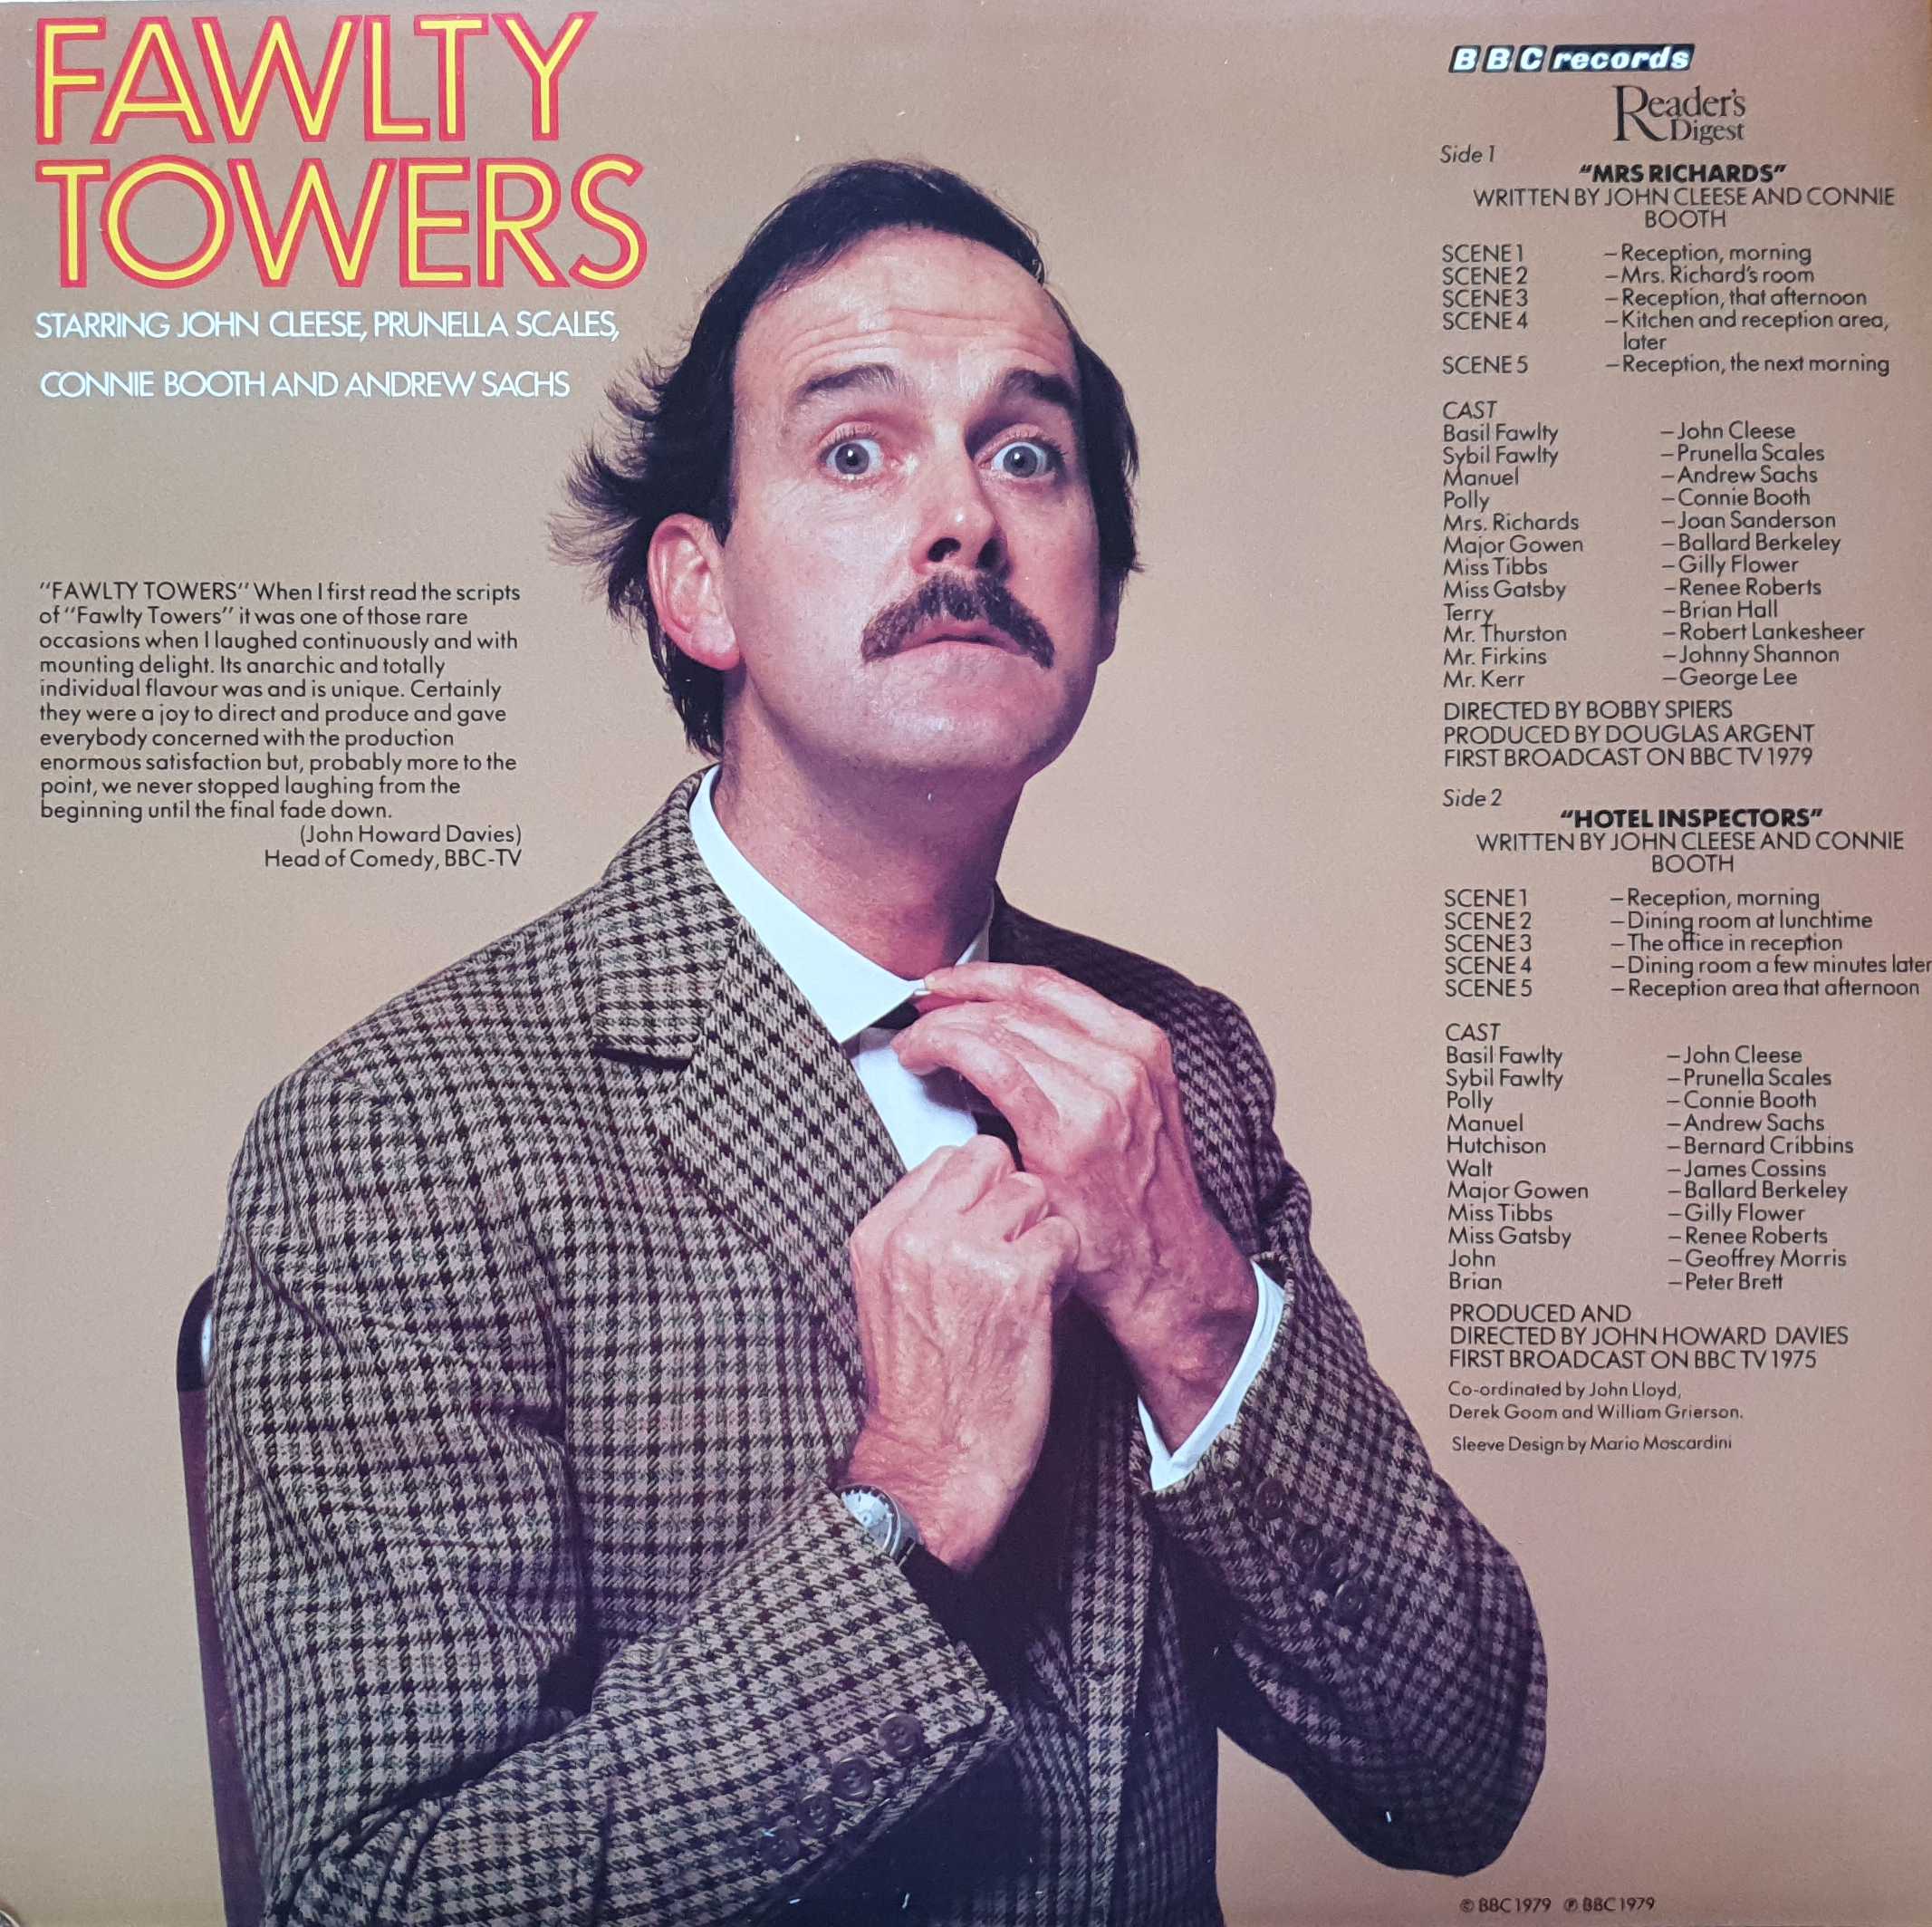 Picture of RD4-358-3 Fawlty Towers by artist John Cleese / Connie Booth from the BBC records and Tapes library